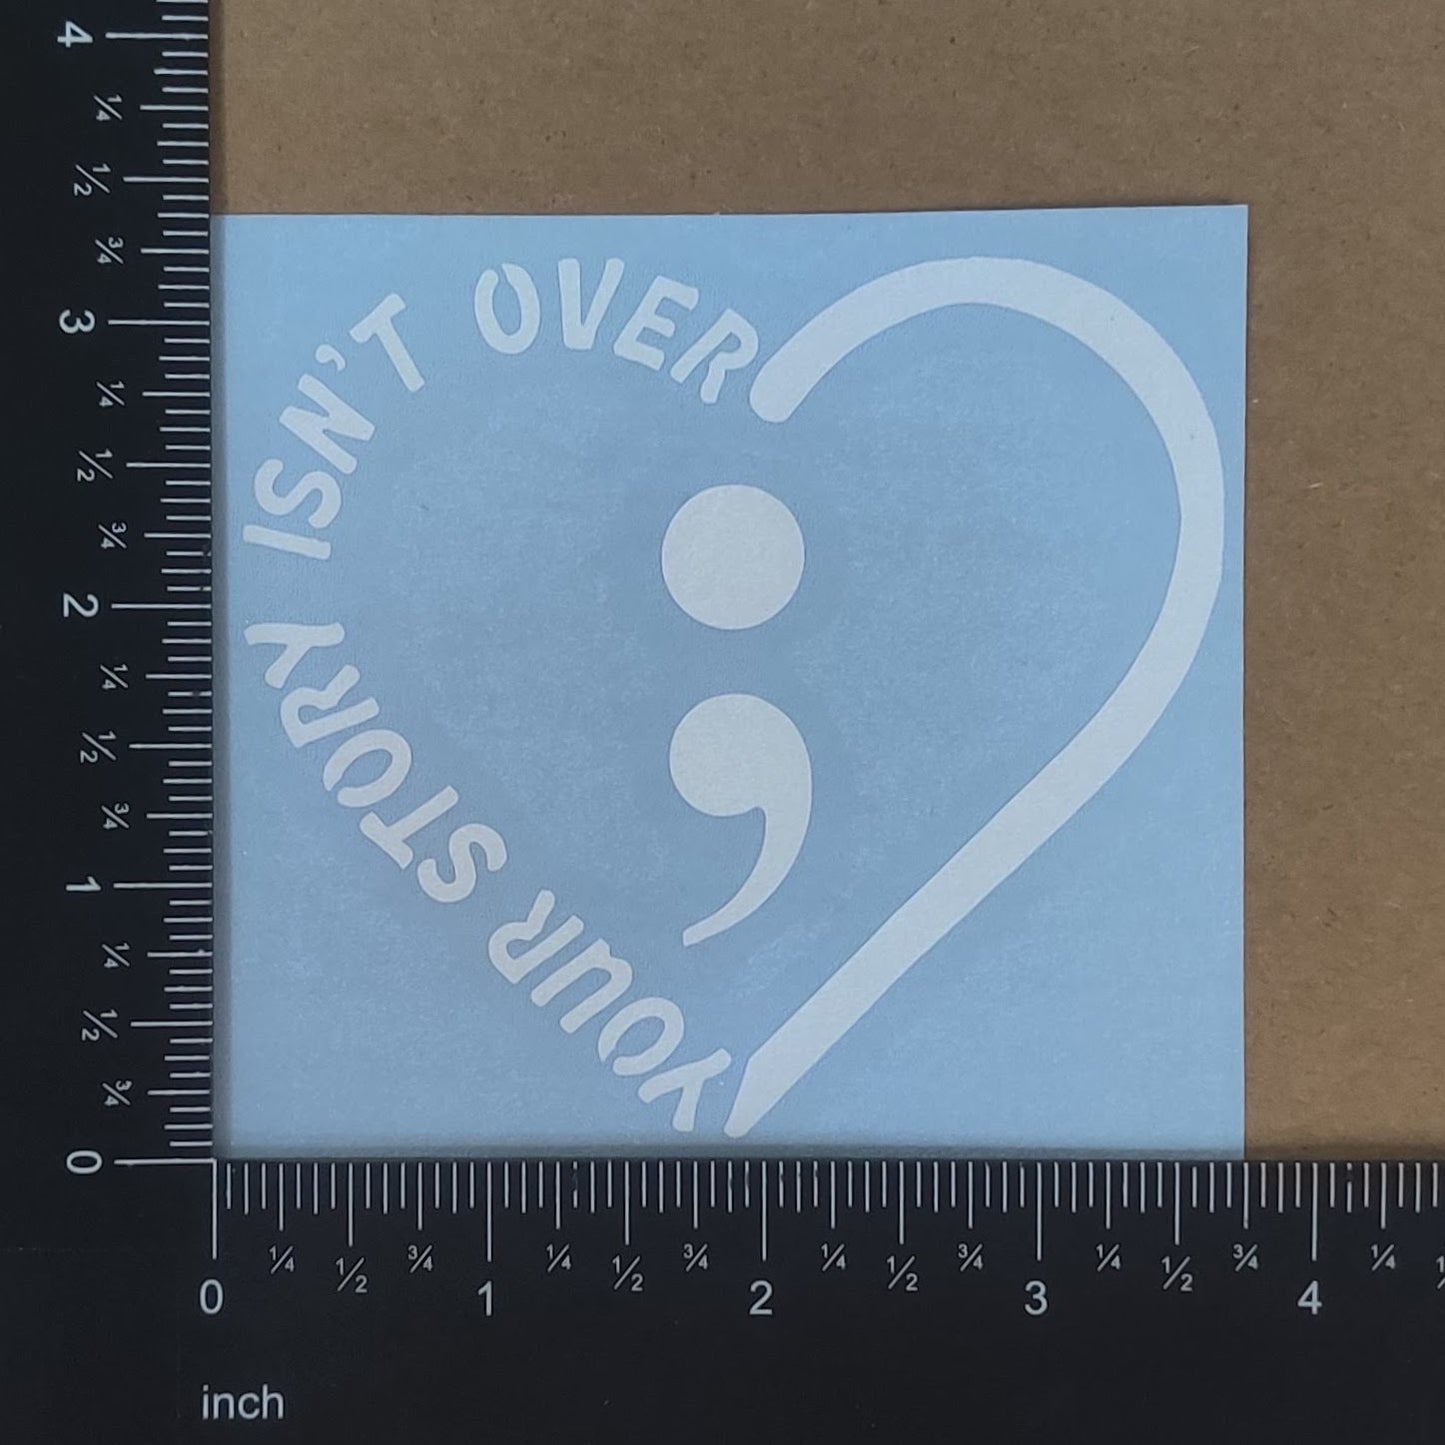 Semicolon Decal 4 Pack